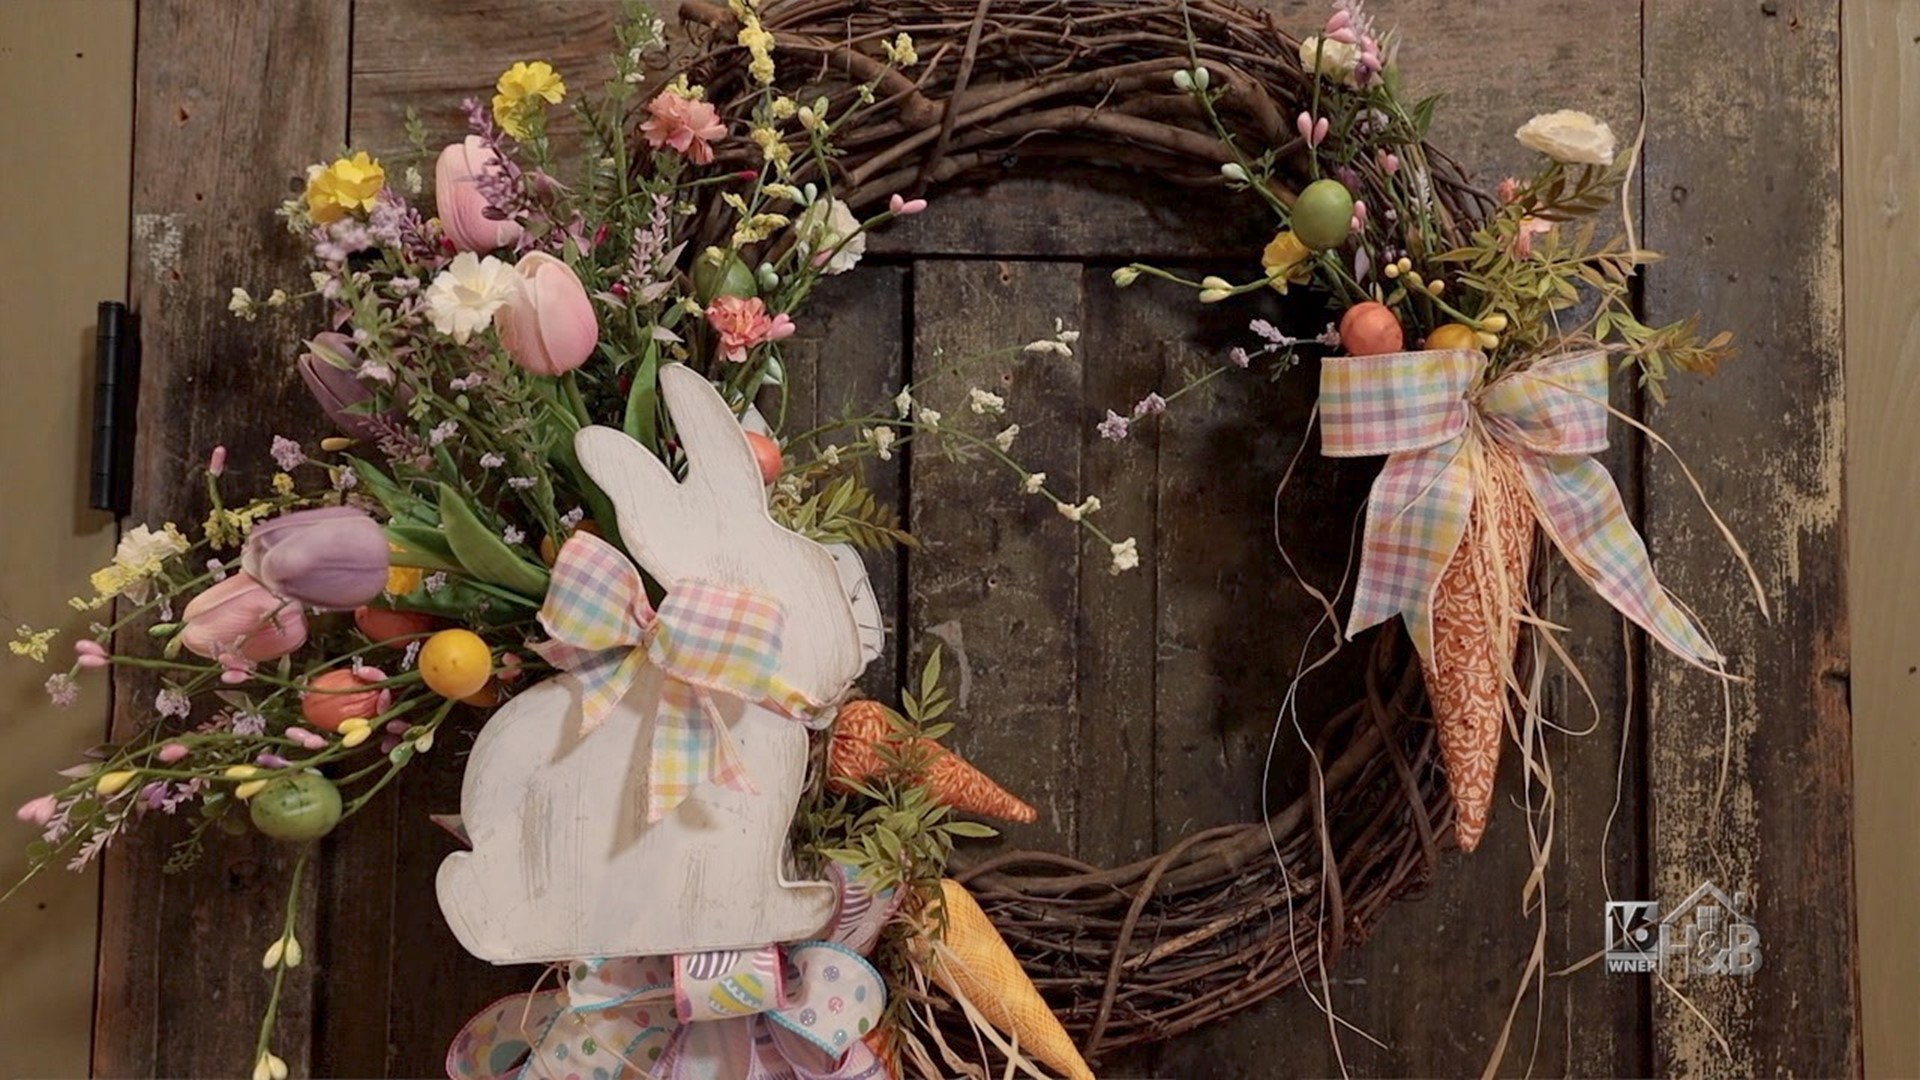 Make This Sweet Bunny Wreath With Inspired Designs By Keith Phelps